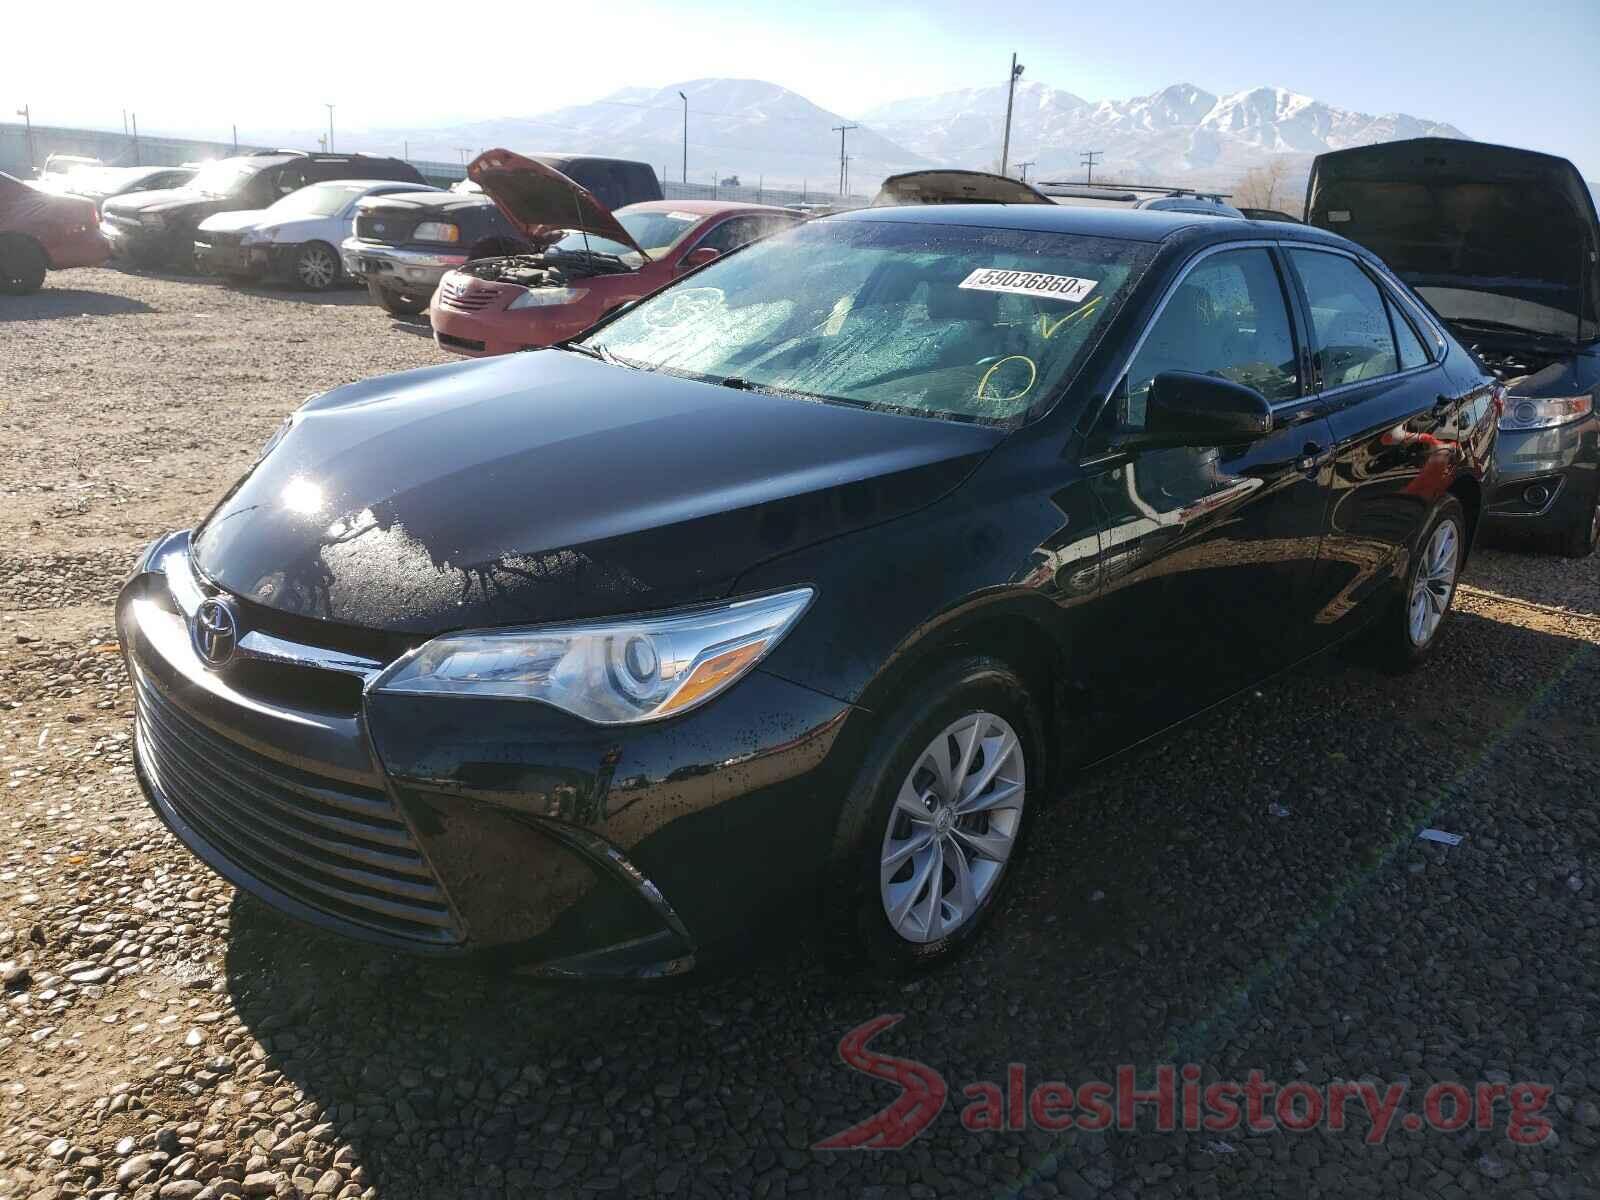 4T4BF1FK7GR572922 2016 TOYOTA CAMRY